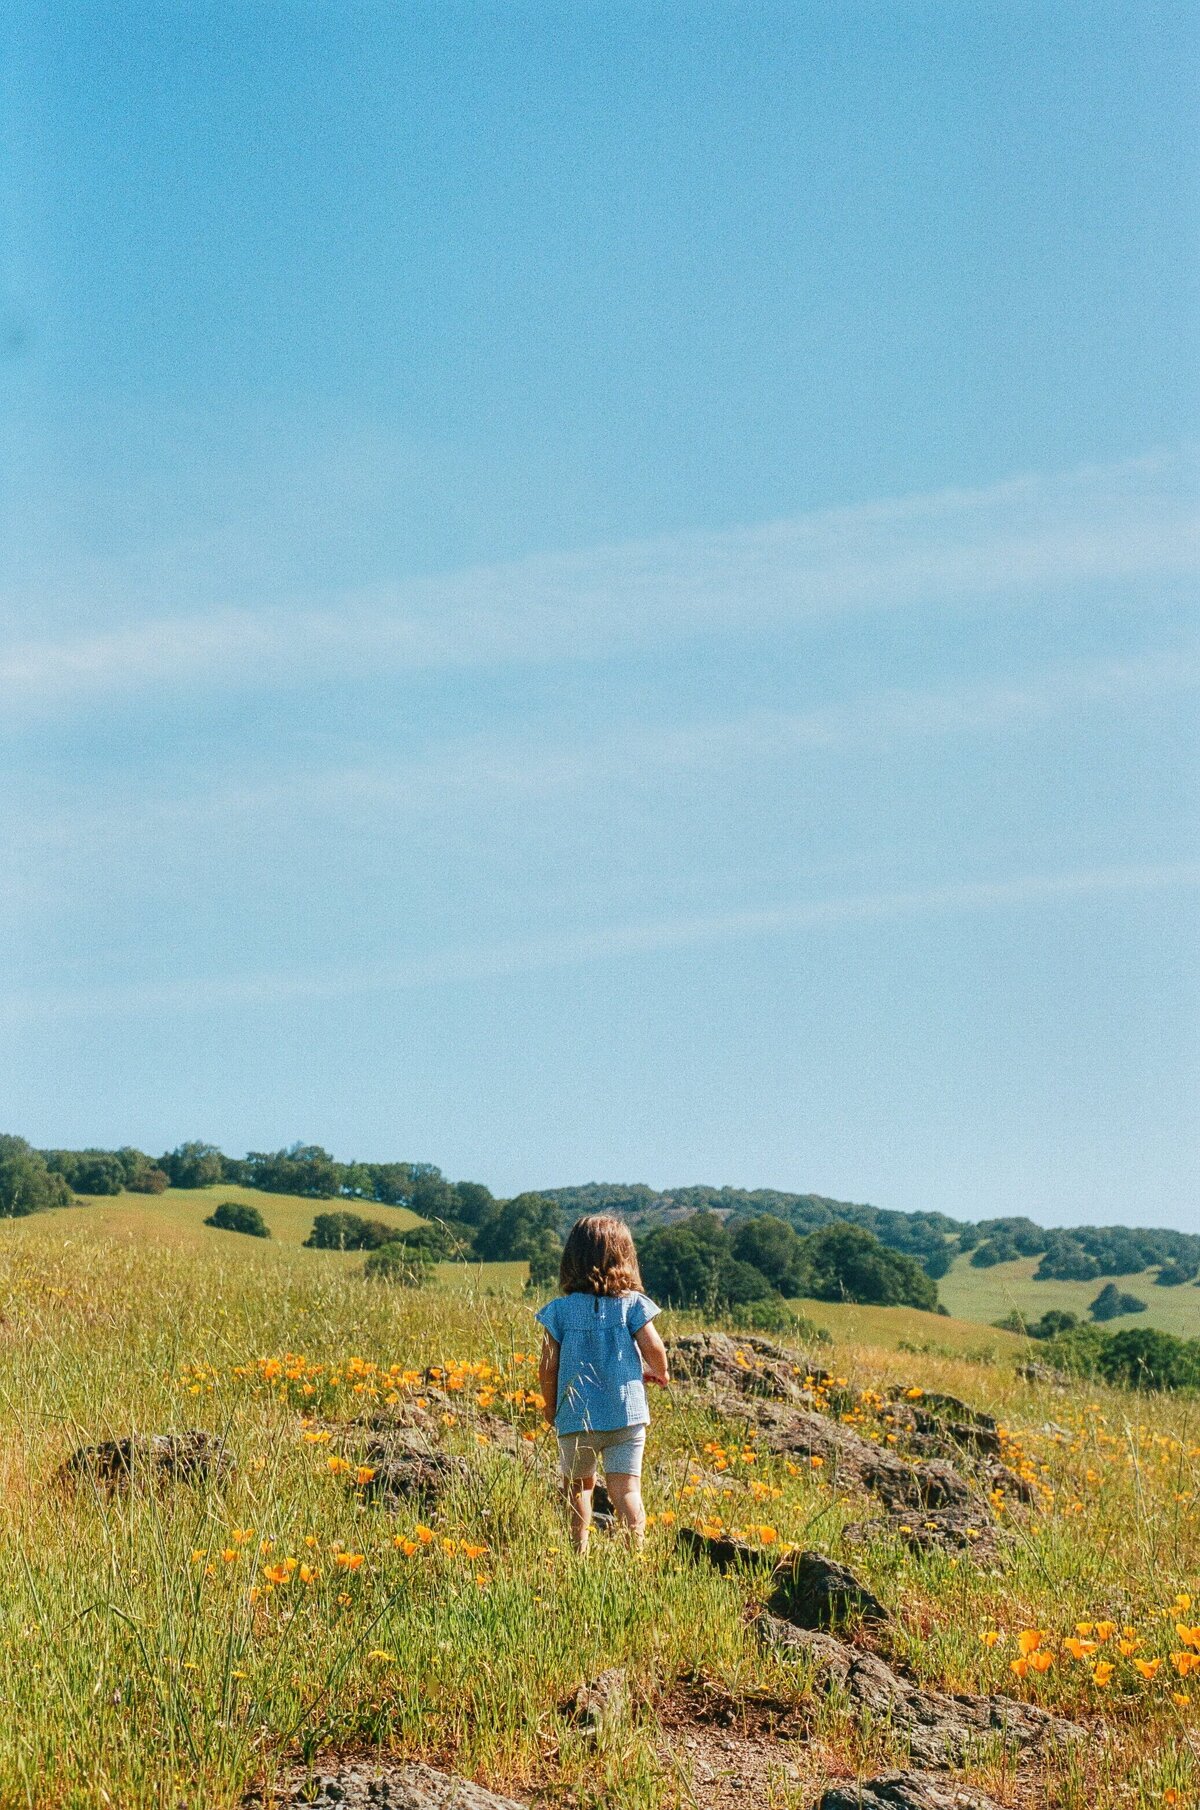 Girl explores a field of poppies